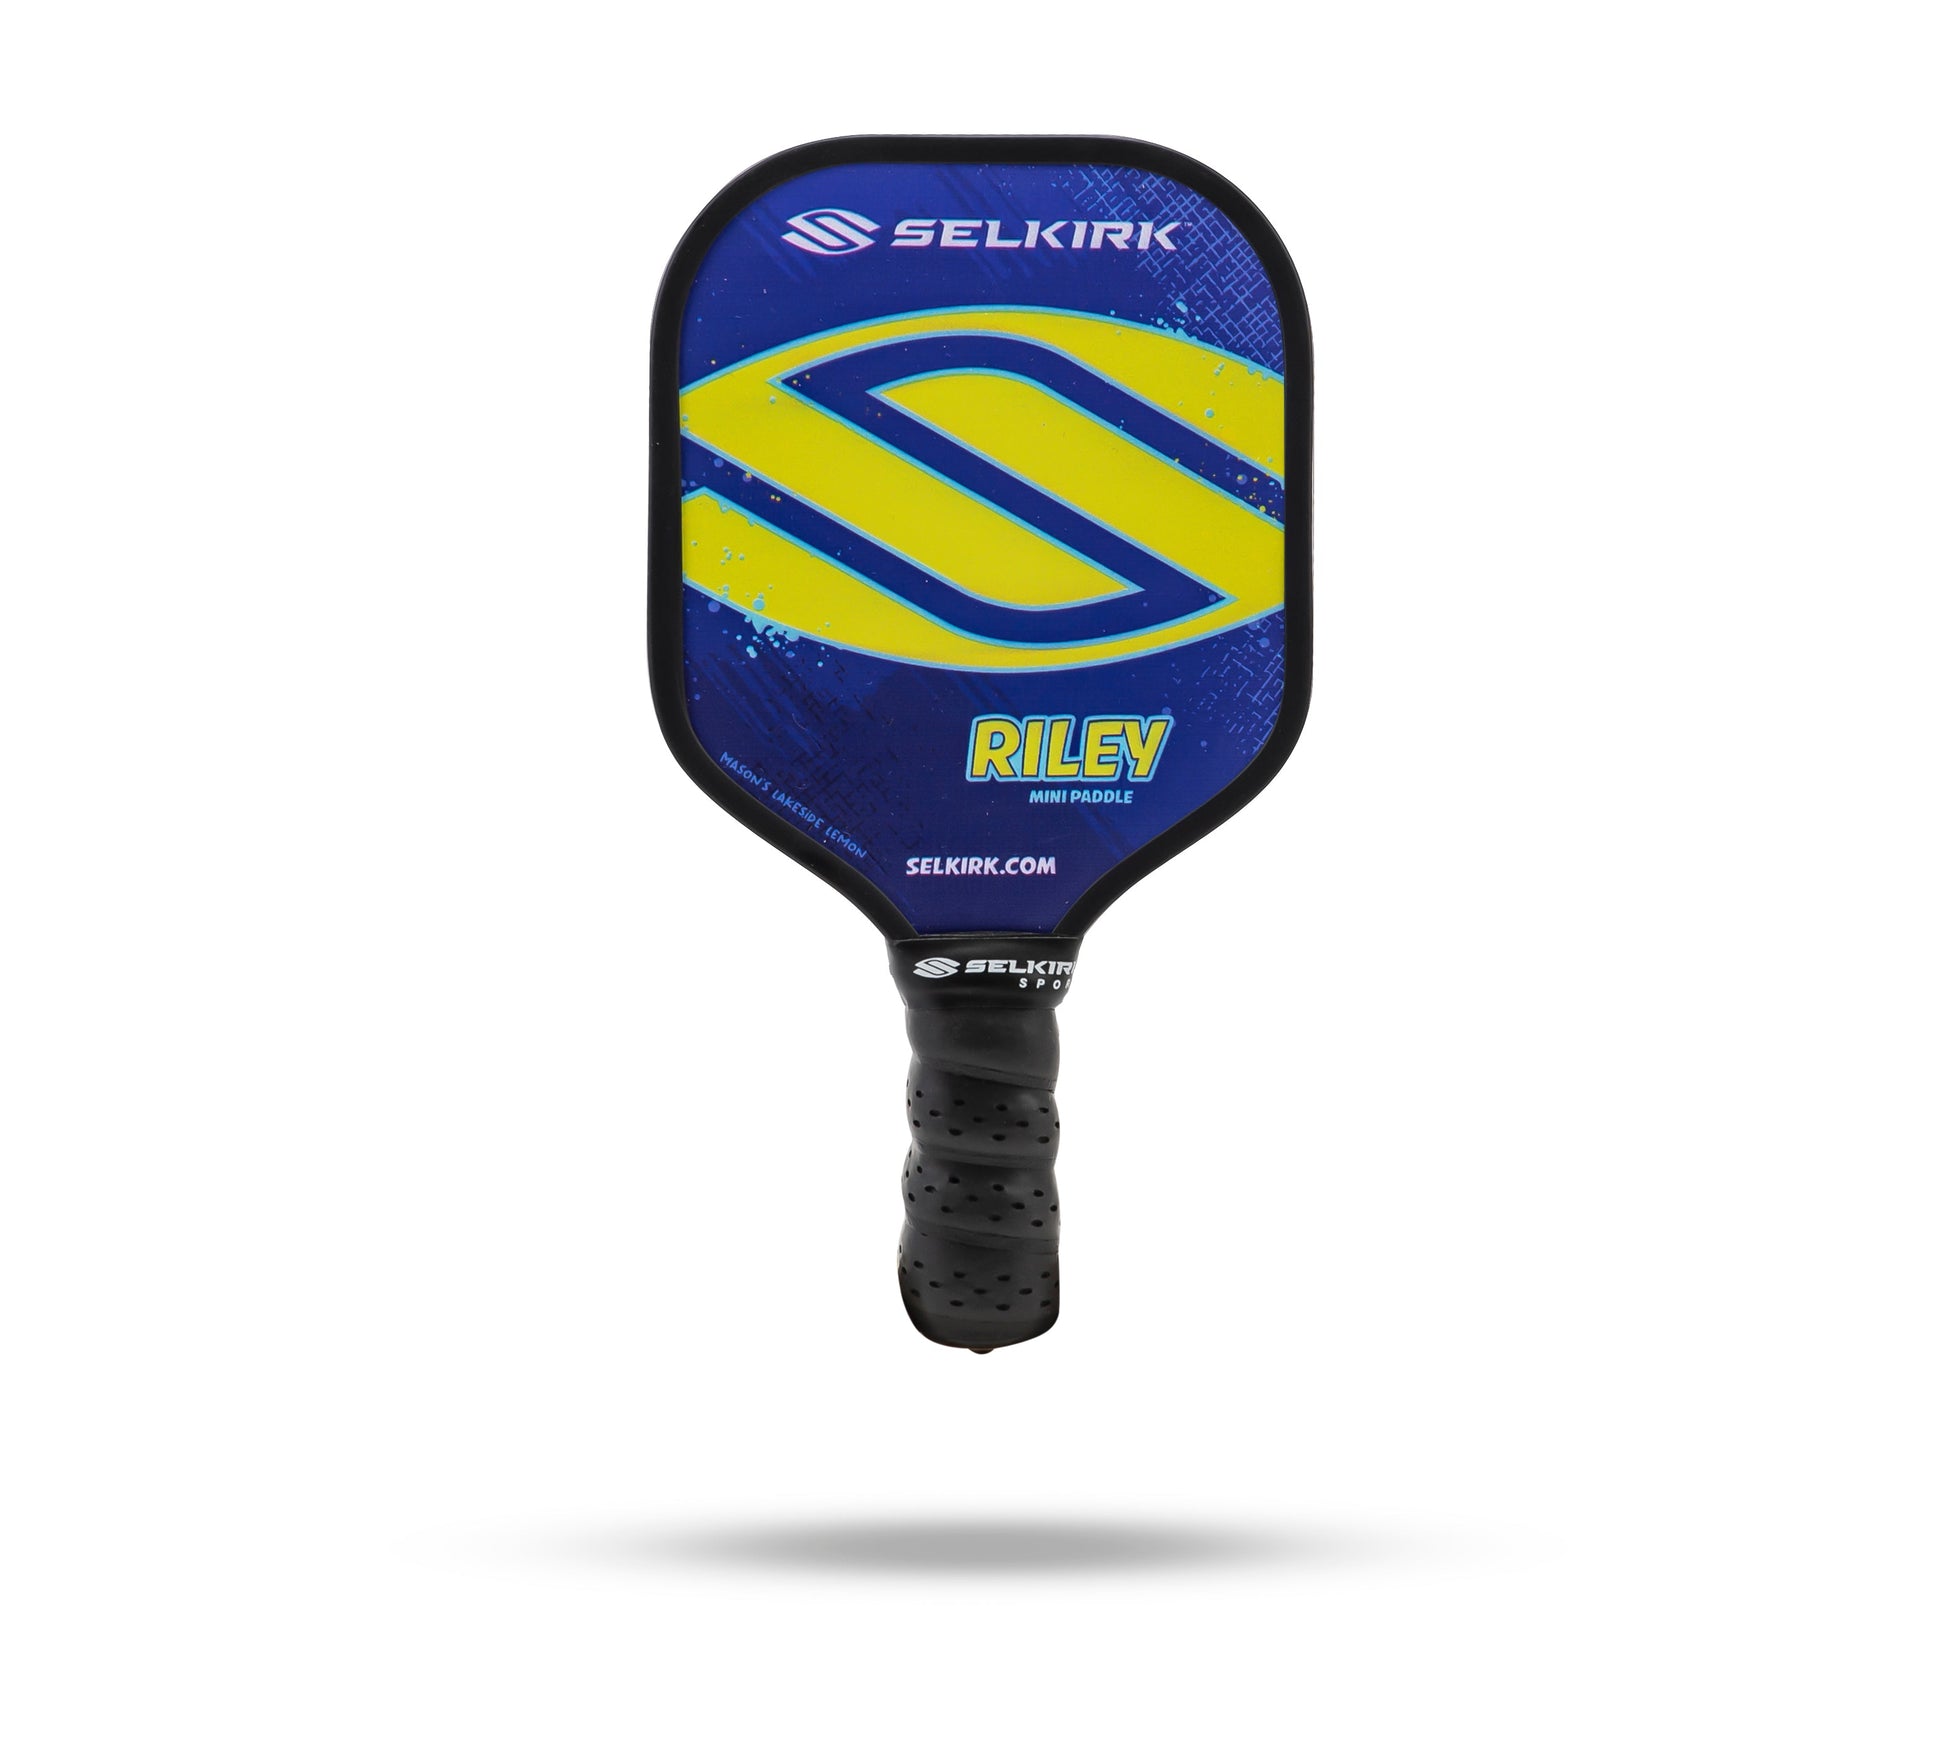 A blue and yellow Selkirk Riley Mini Pickleball Paddle from the Selkirk Paddle Collection on a white background.